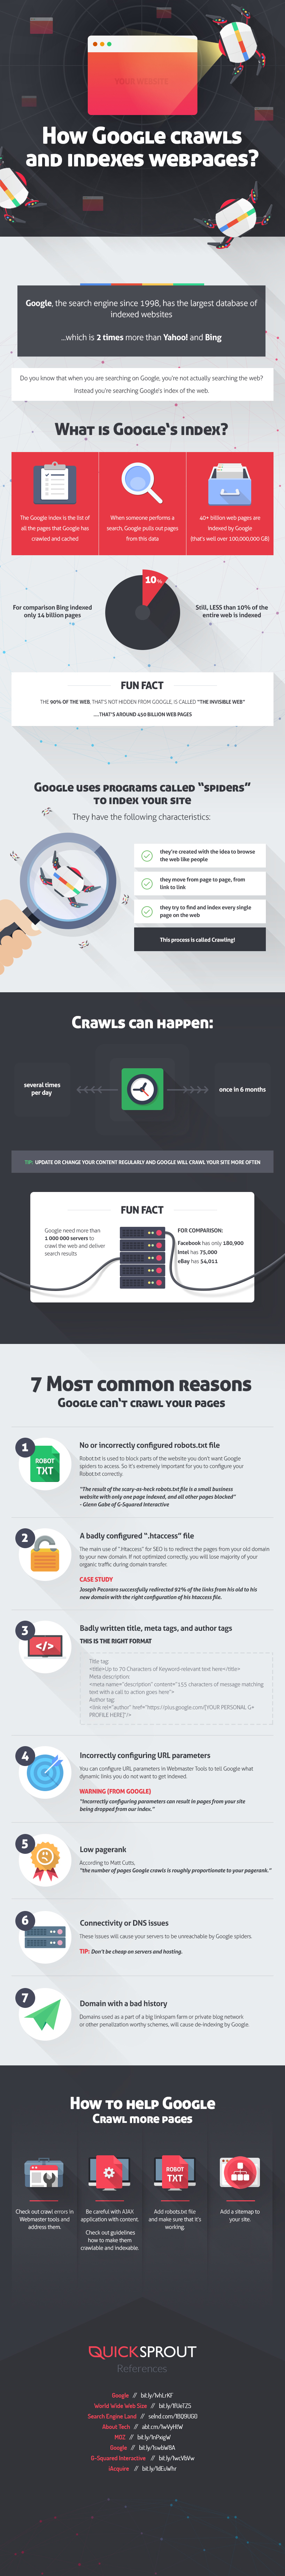 Top 7 Common Reasons Your Site isn’t Ranking On Google